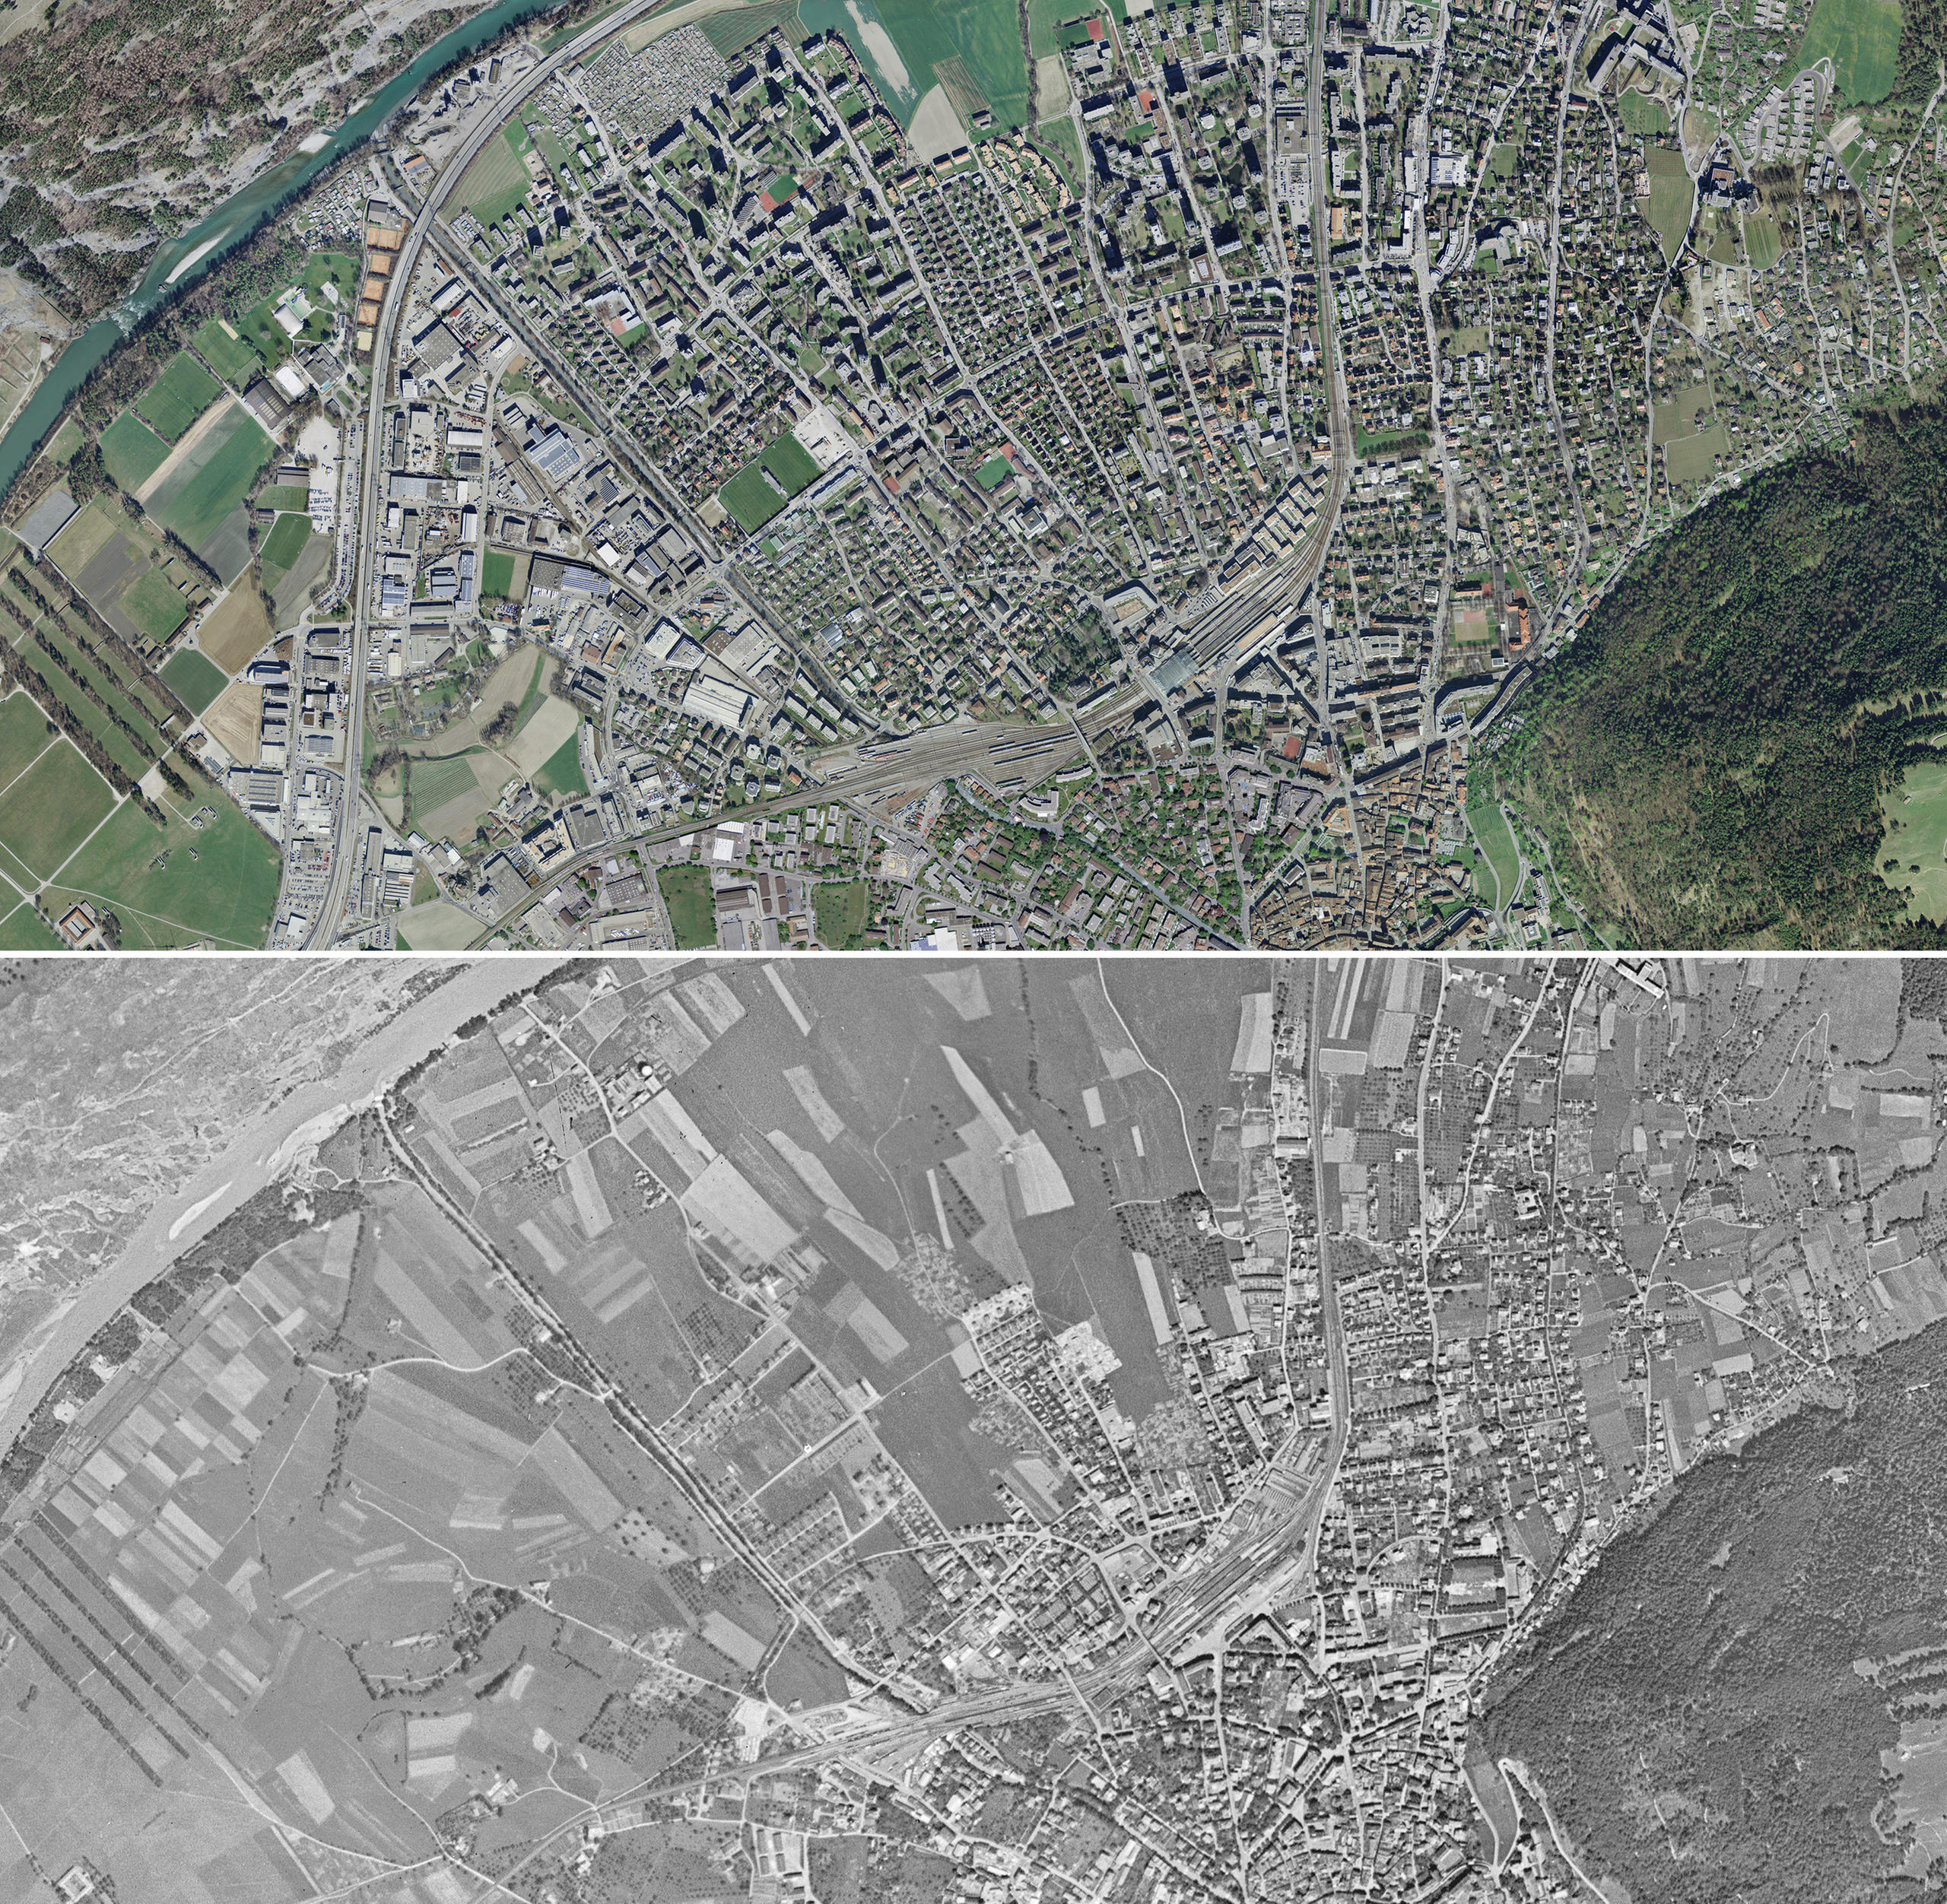 Aerial view of Chur above in 2014 and below in 1946